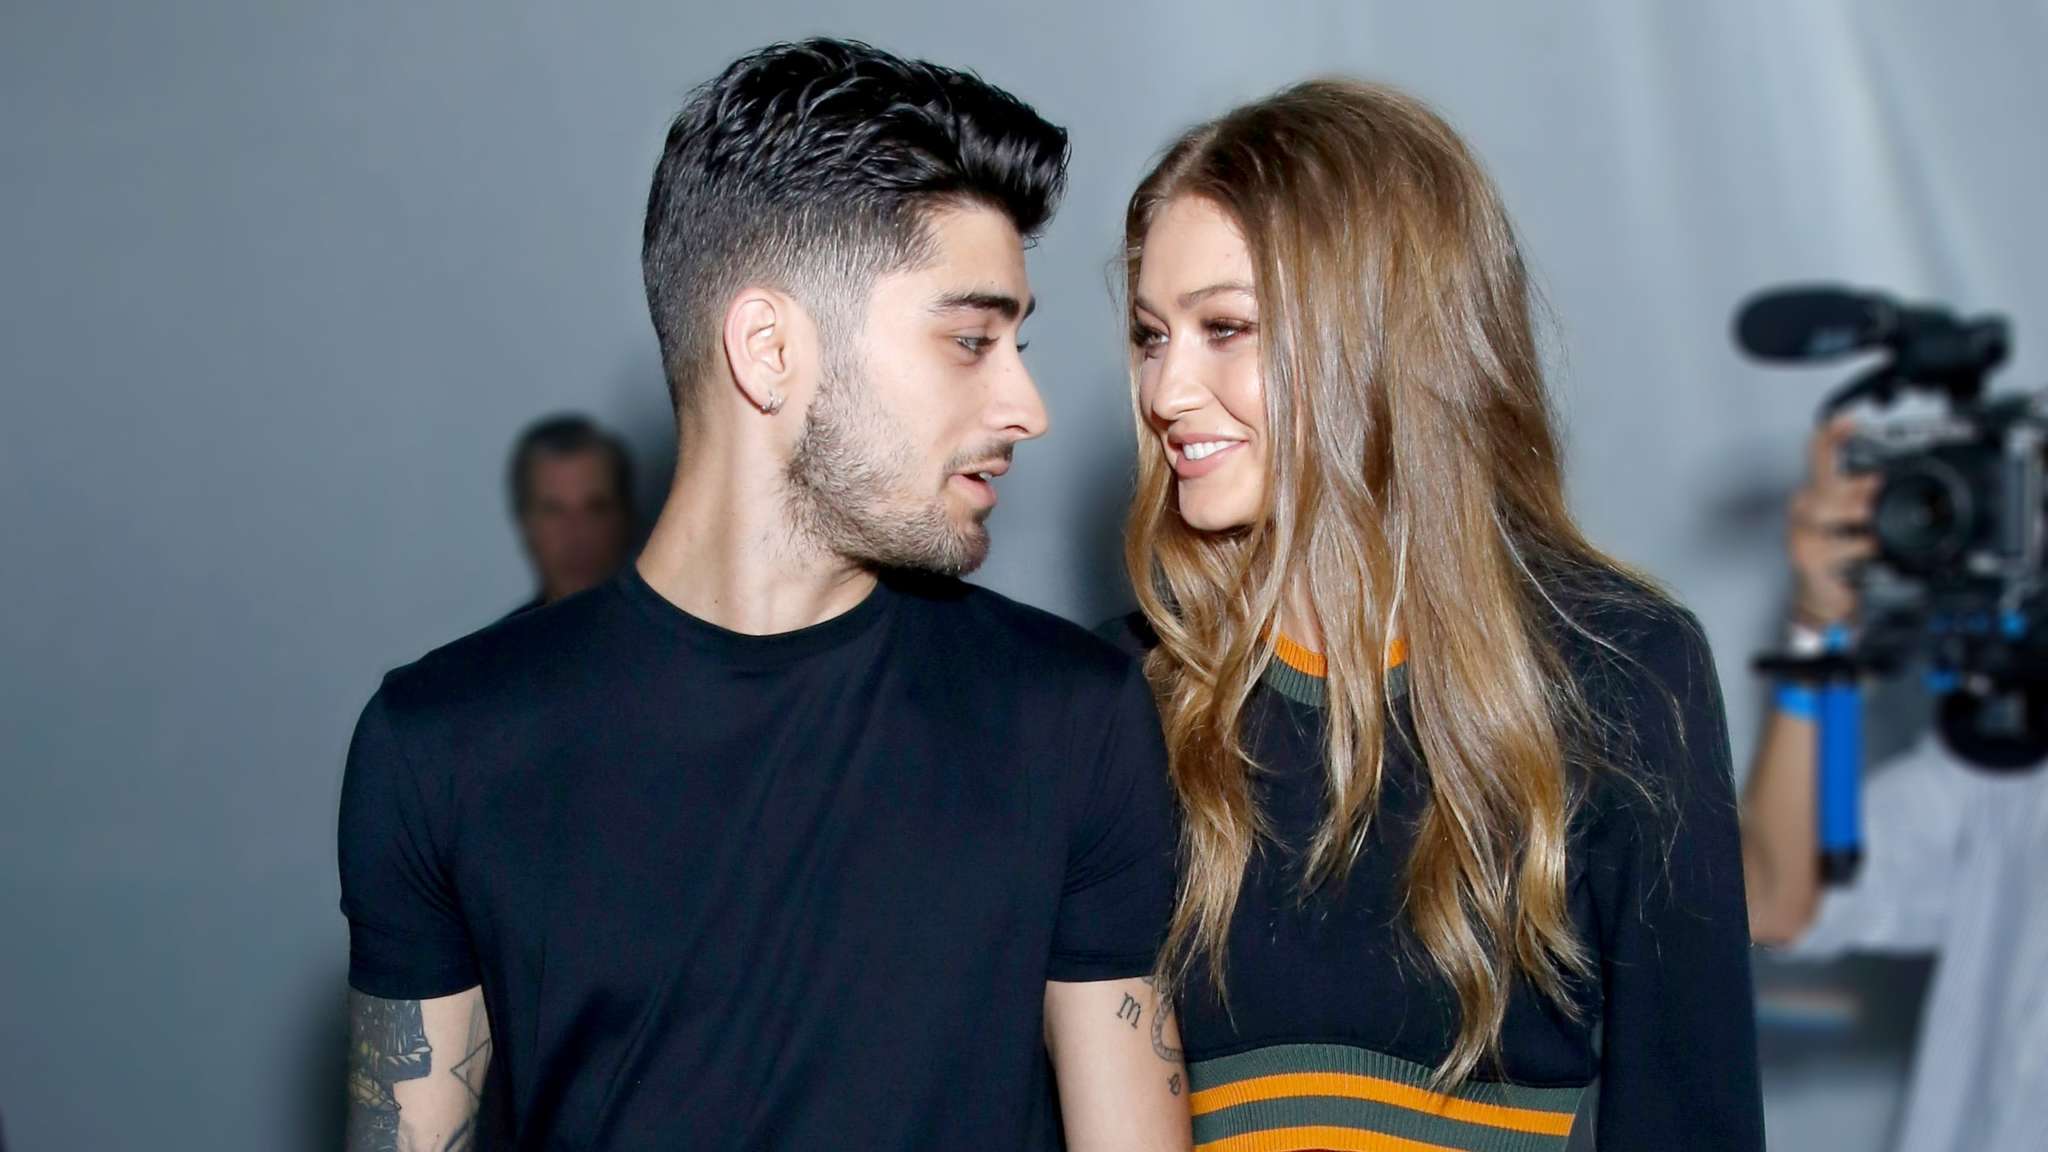 Gigi Hadid Confirms She And Zayn Malik Are Back Together With Sweet Valentine’s Day ...3 日前